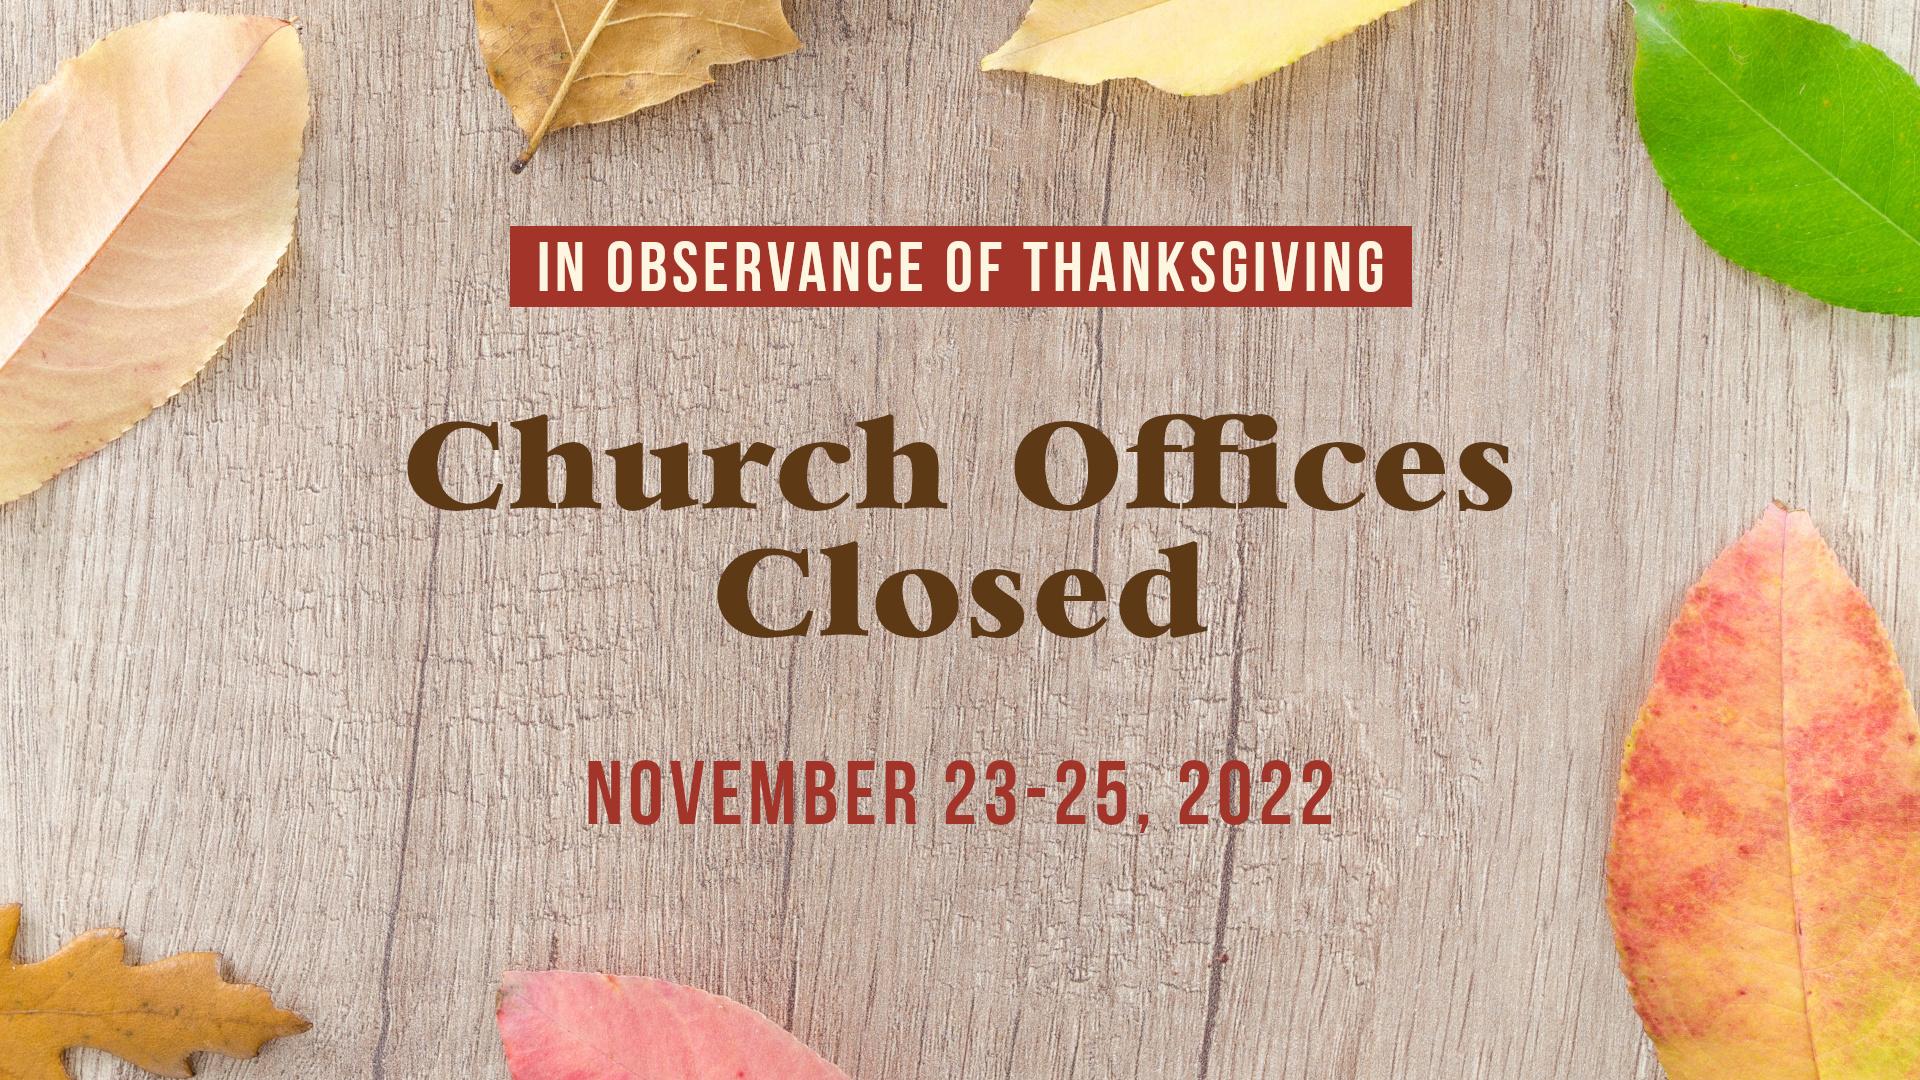 Church offices closed November 23-25, 2022, in observance of Thanksgiving